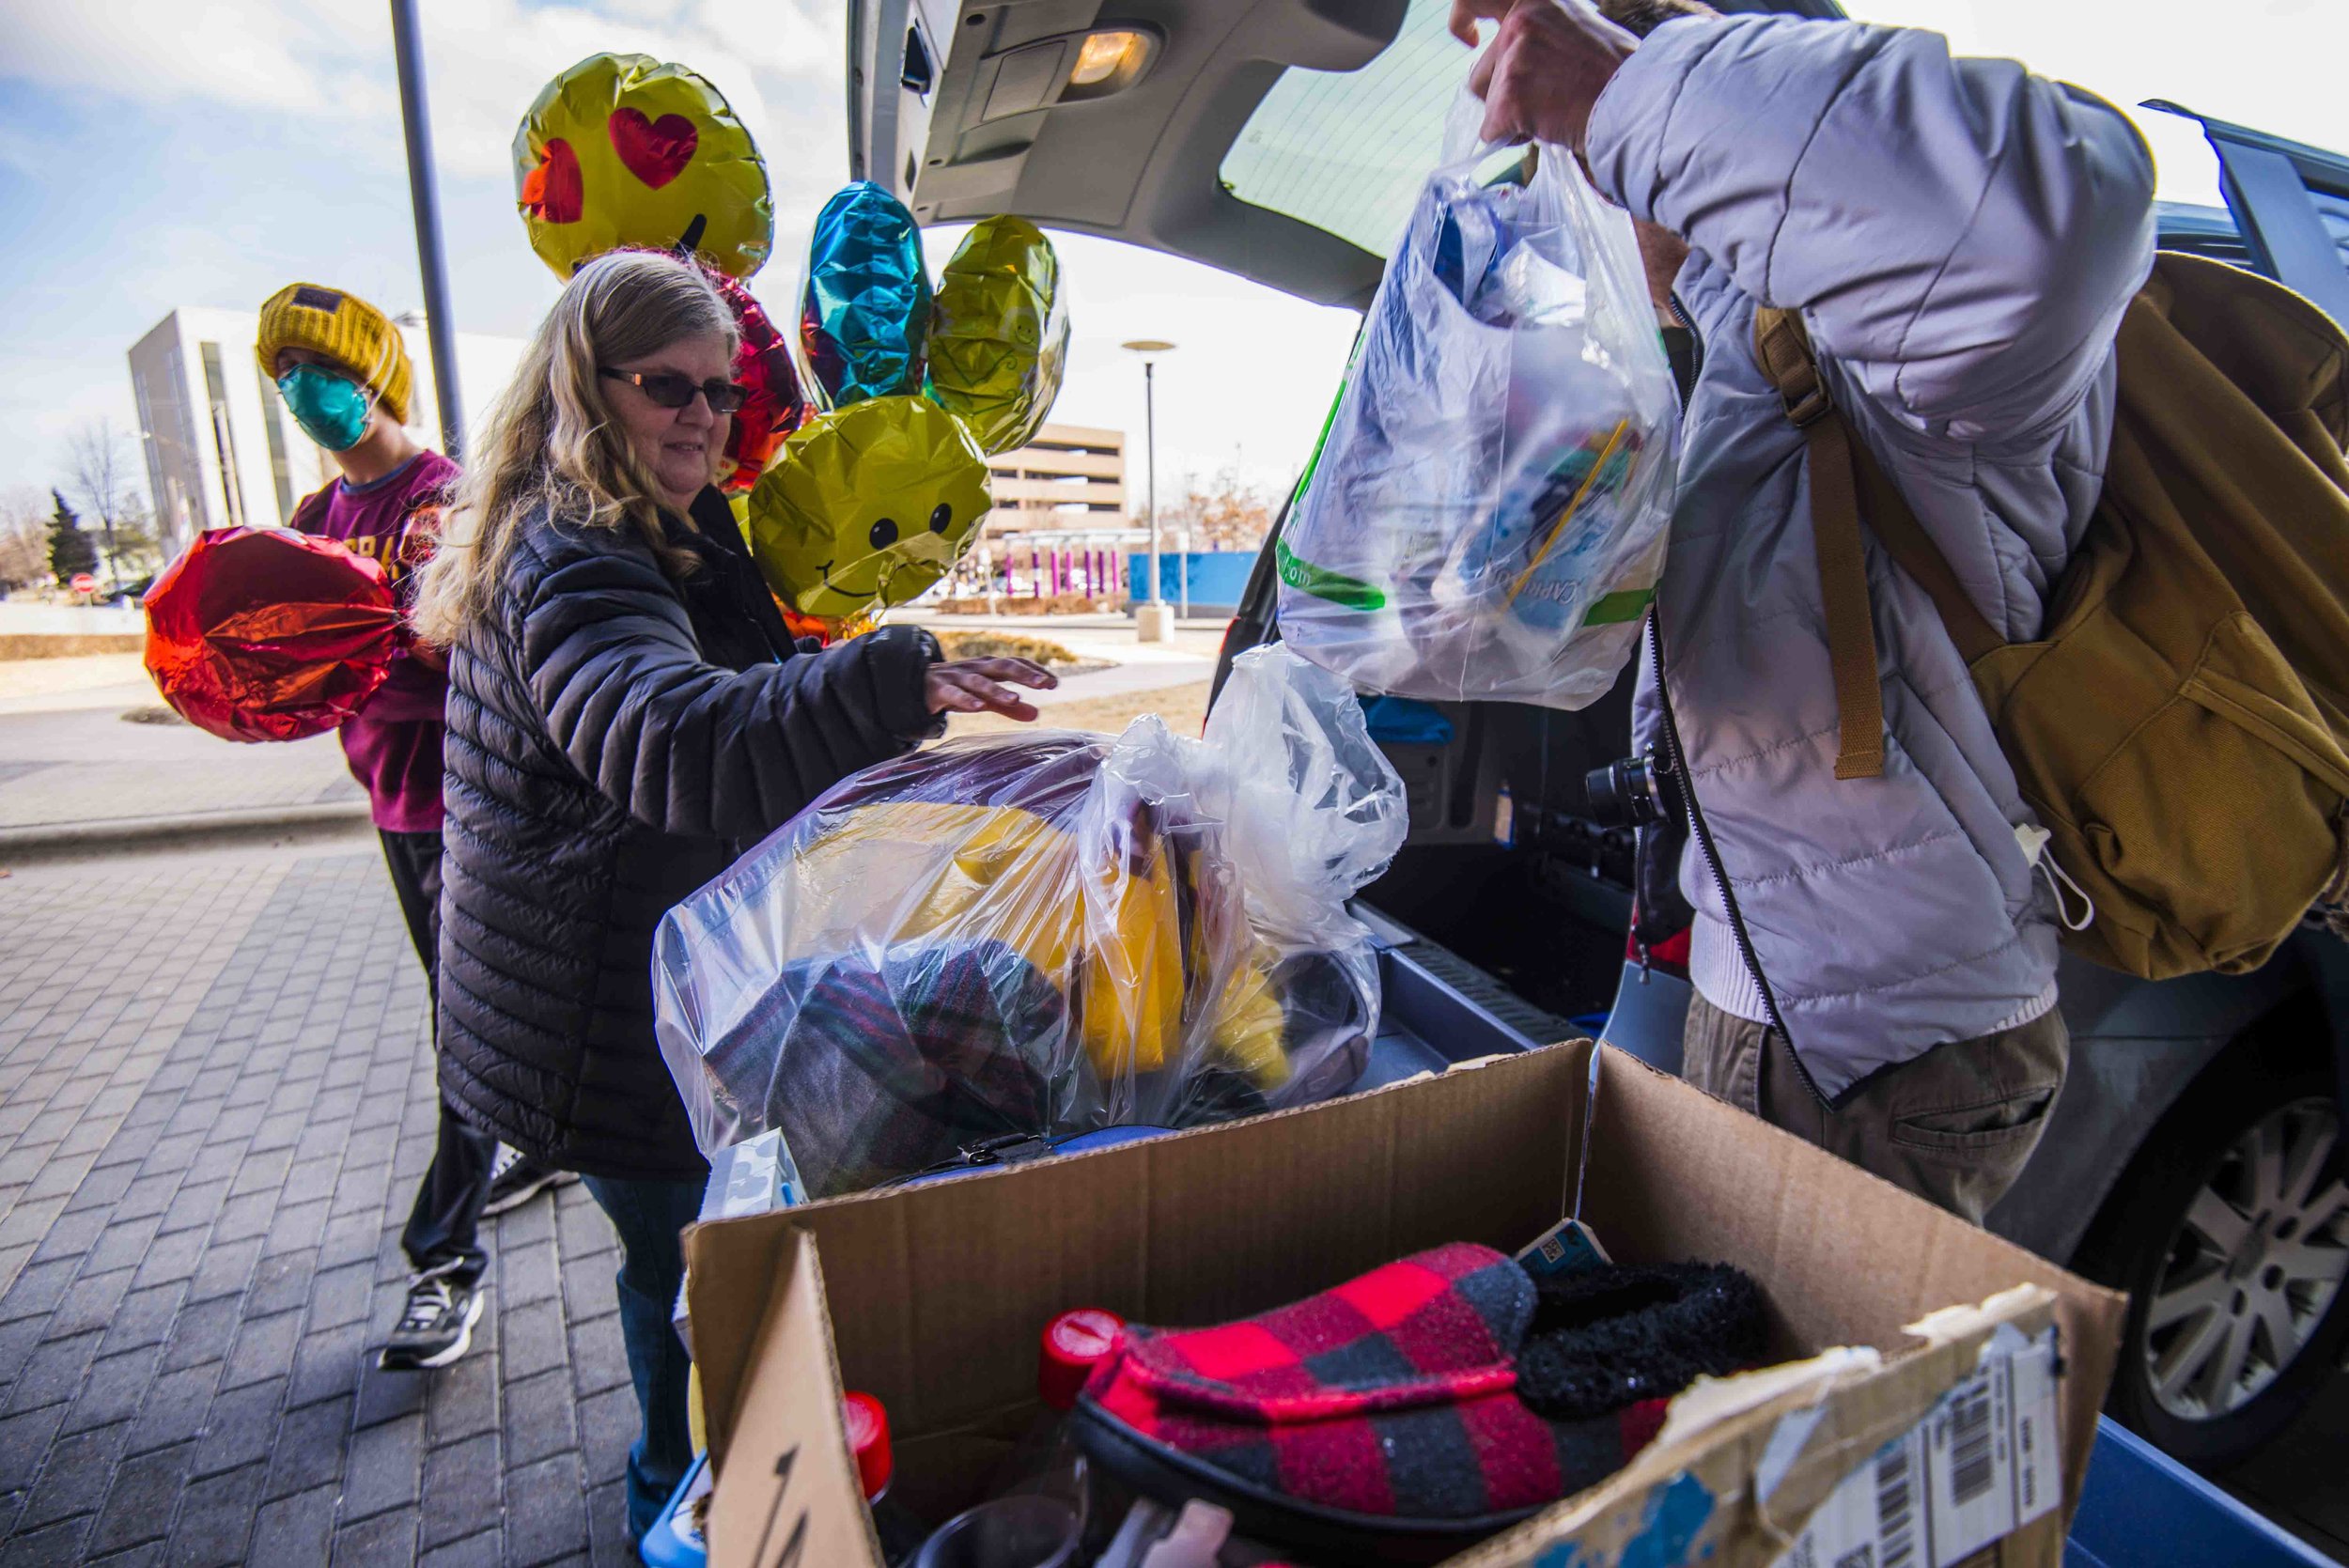  Mary Tanner, left, and Hartland junior Santino Mattioli, right, help Kyle Tanner pack to move on March 5 from the University of Minnesota Masonic Children’s Hospital into the Ronald McDonald House. “I feel like I’m just going to enjoy very small thi